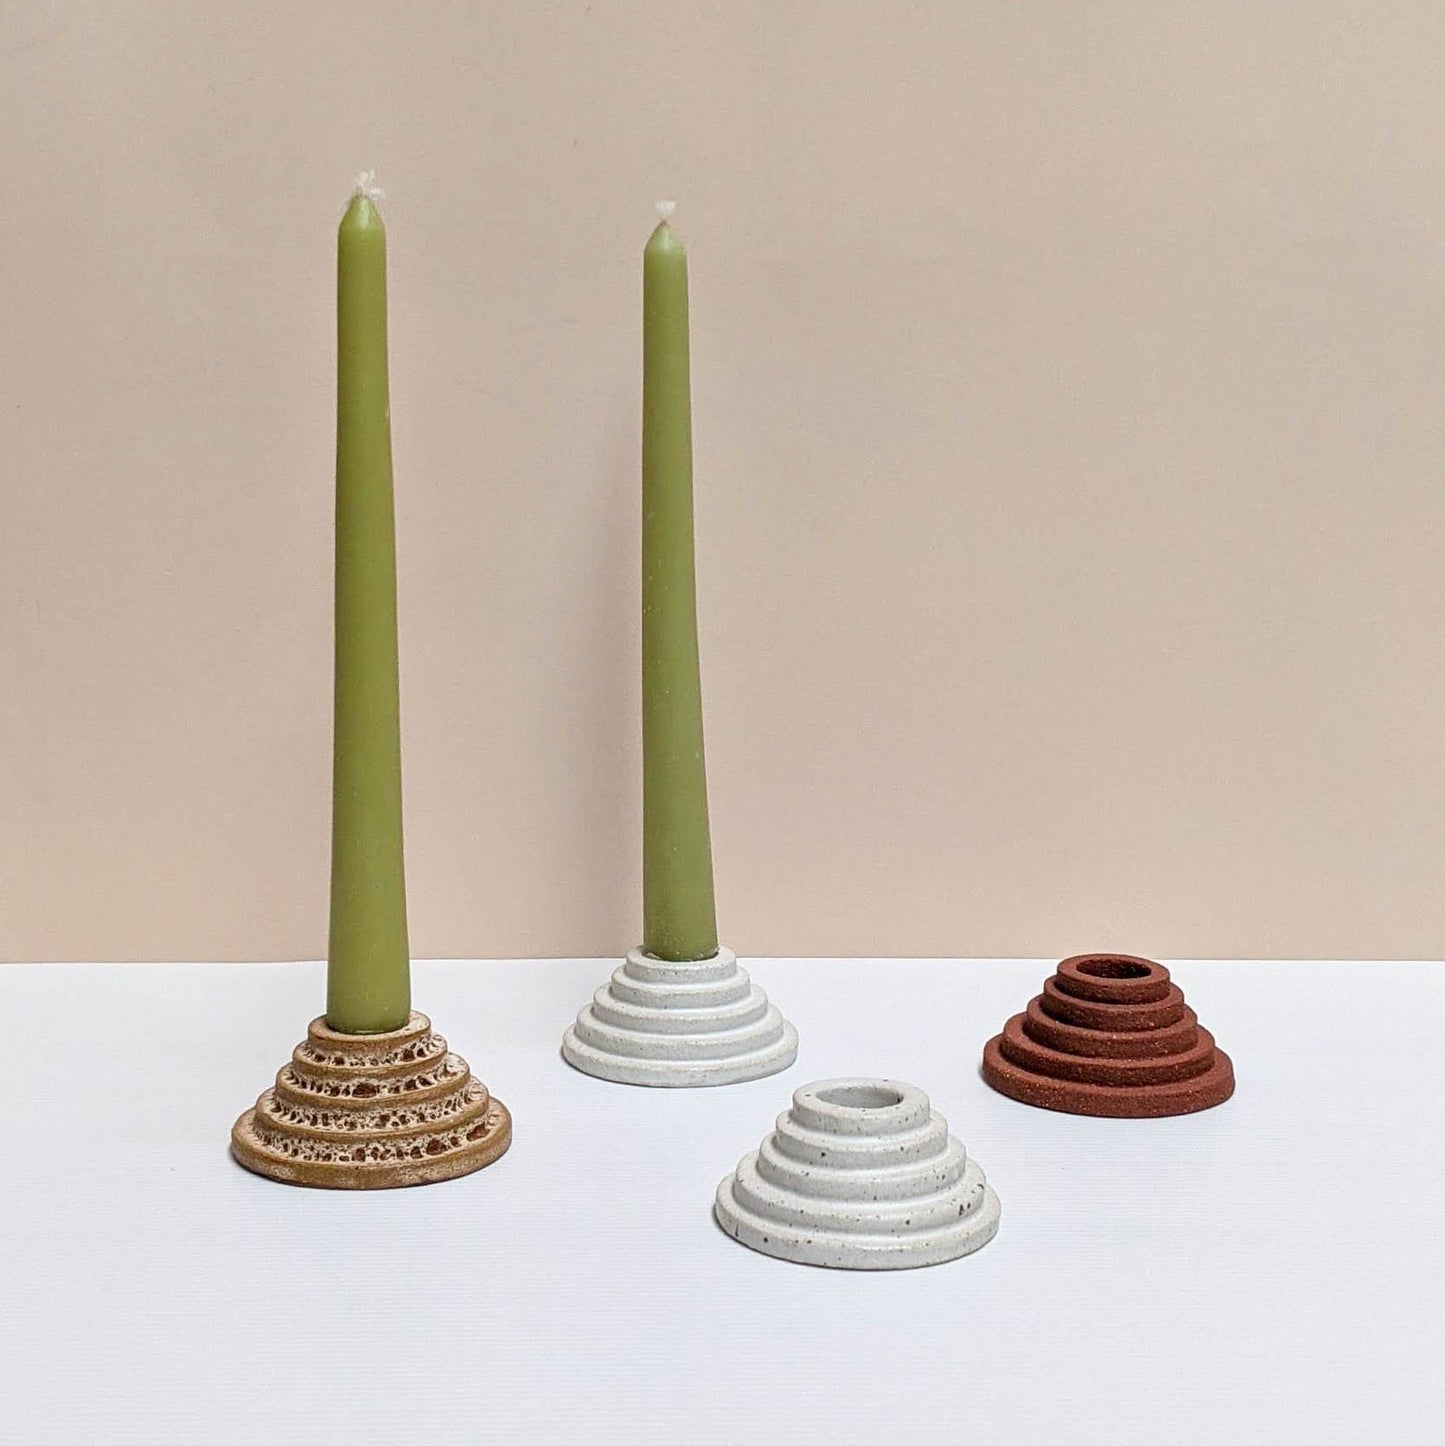 4  circular ceramic candle holders in rust lava, white, speckled cream, and terracotta colours.  Each candle features steps leading up to the candle. Two of the candle holders have green unlit candles and are sitting on a white and cream backdrop. 